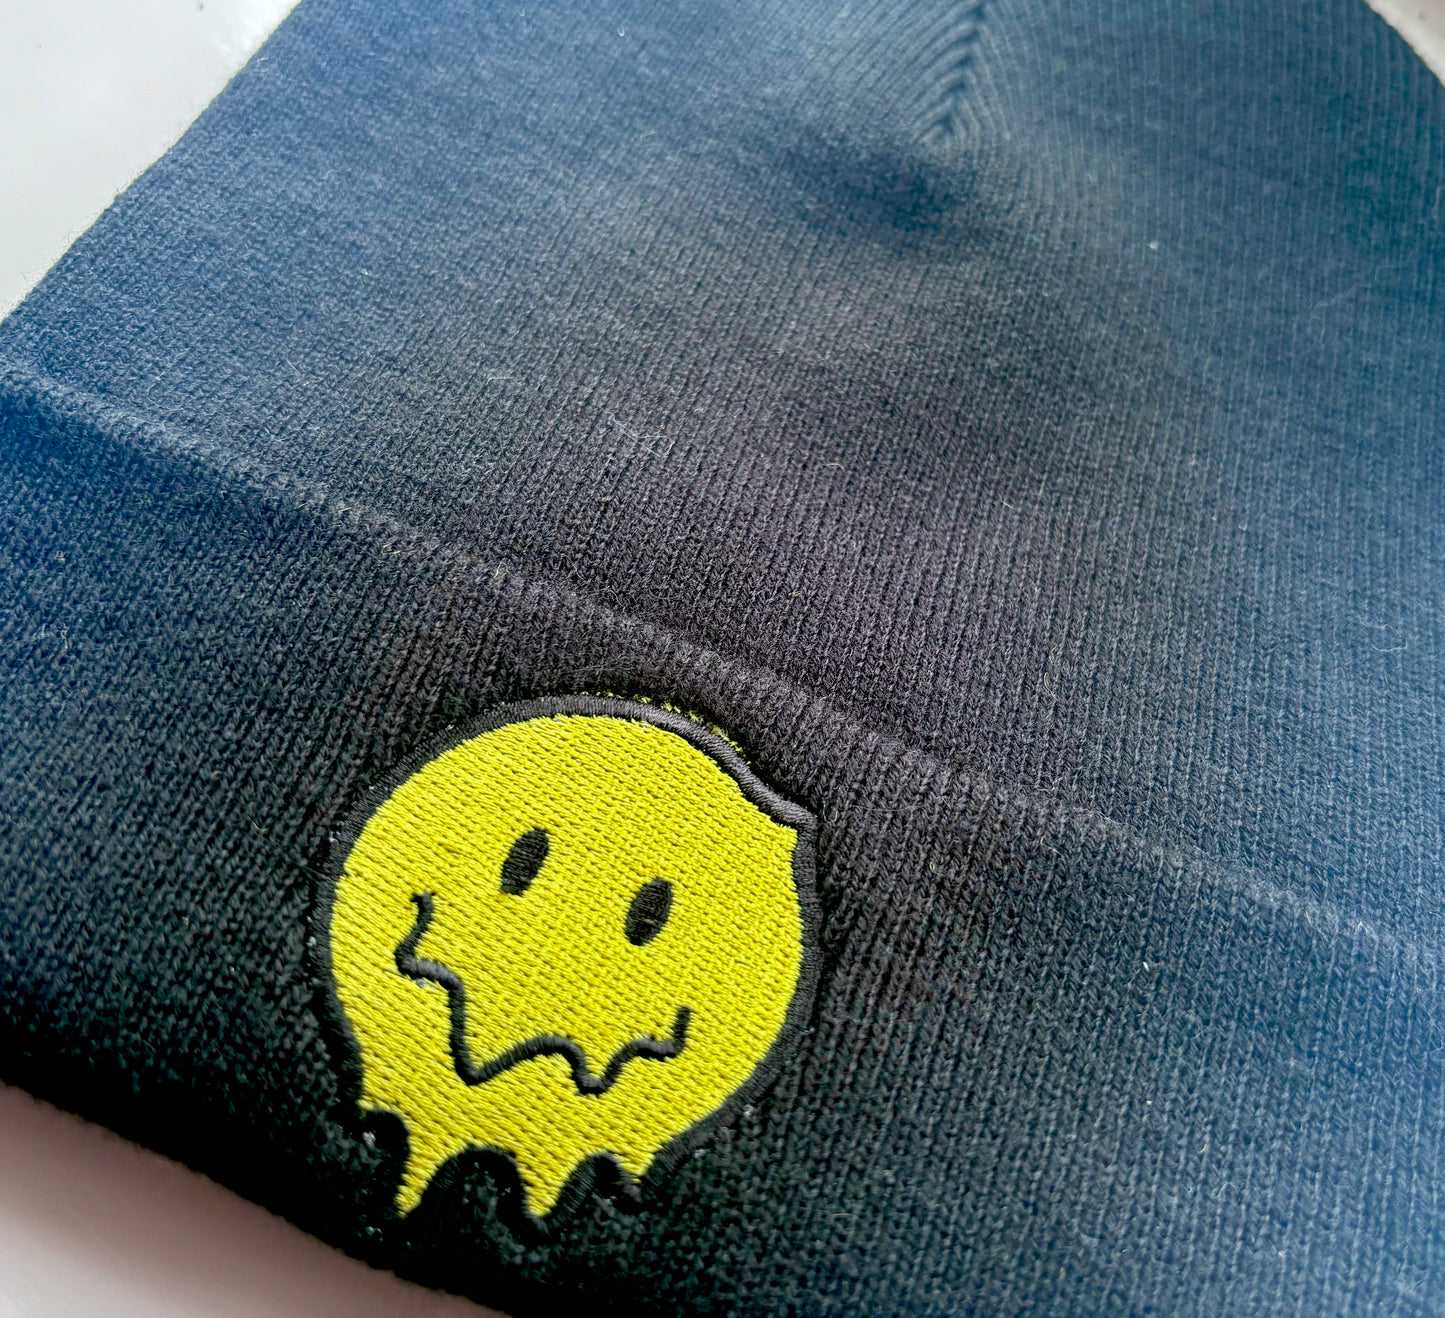 Melting Smiley Face Embroidered Cuffed Beanie Hat